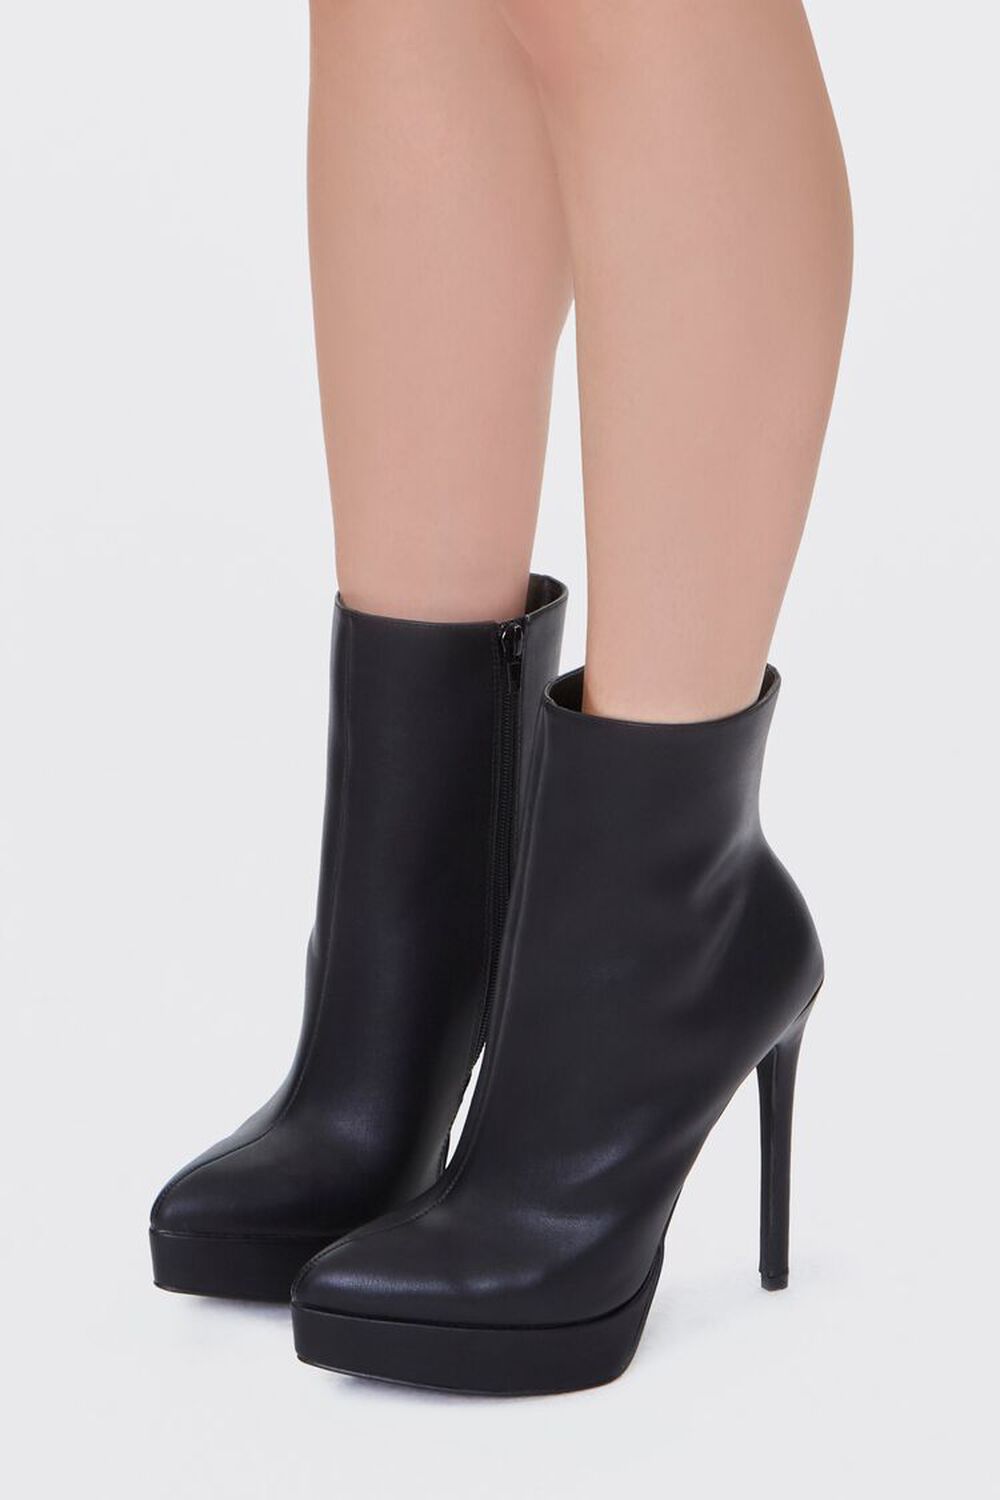 BLACK Faux Leather Stiletto Booties, image 1